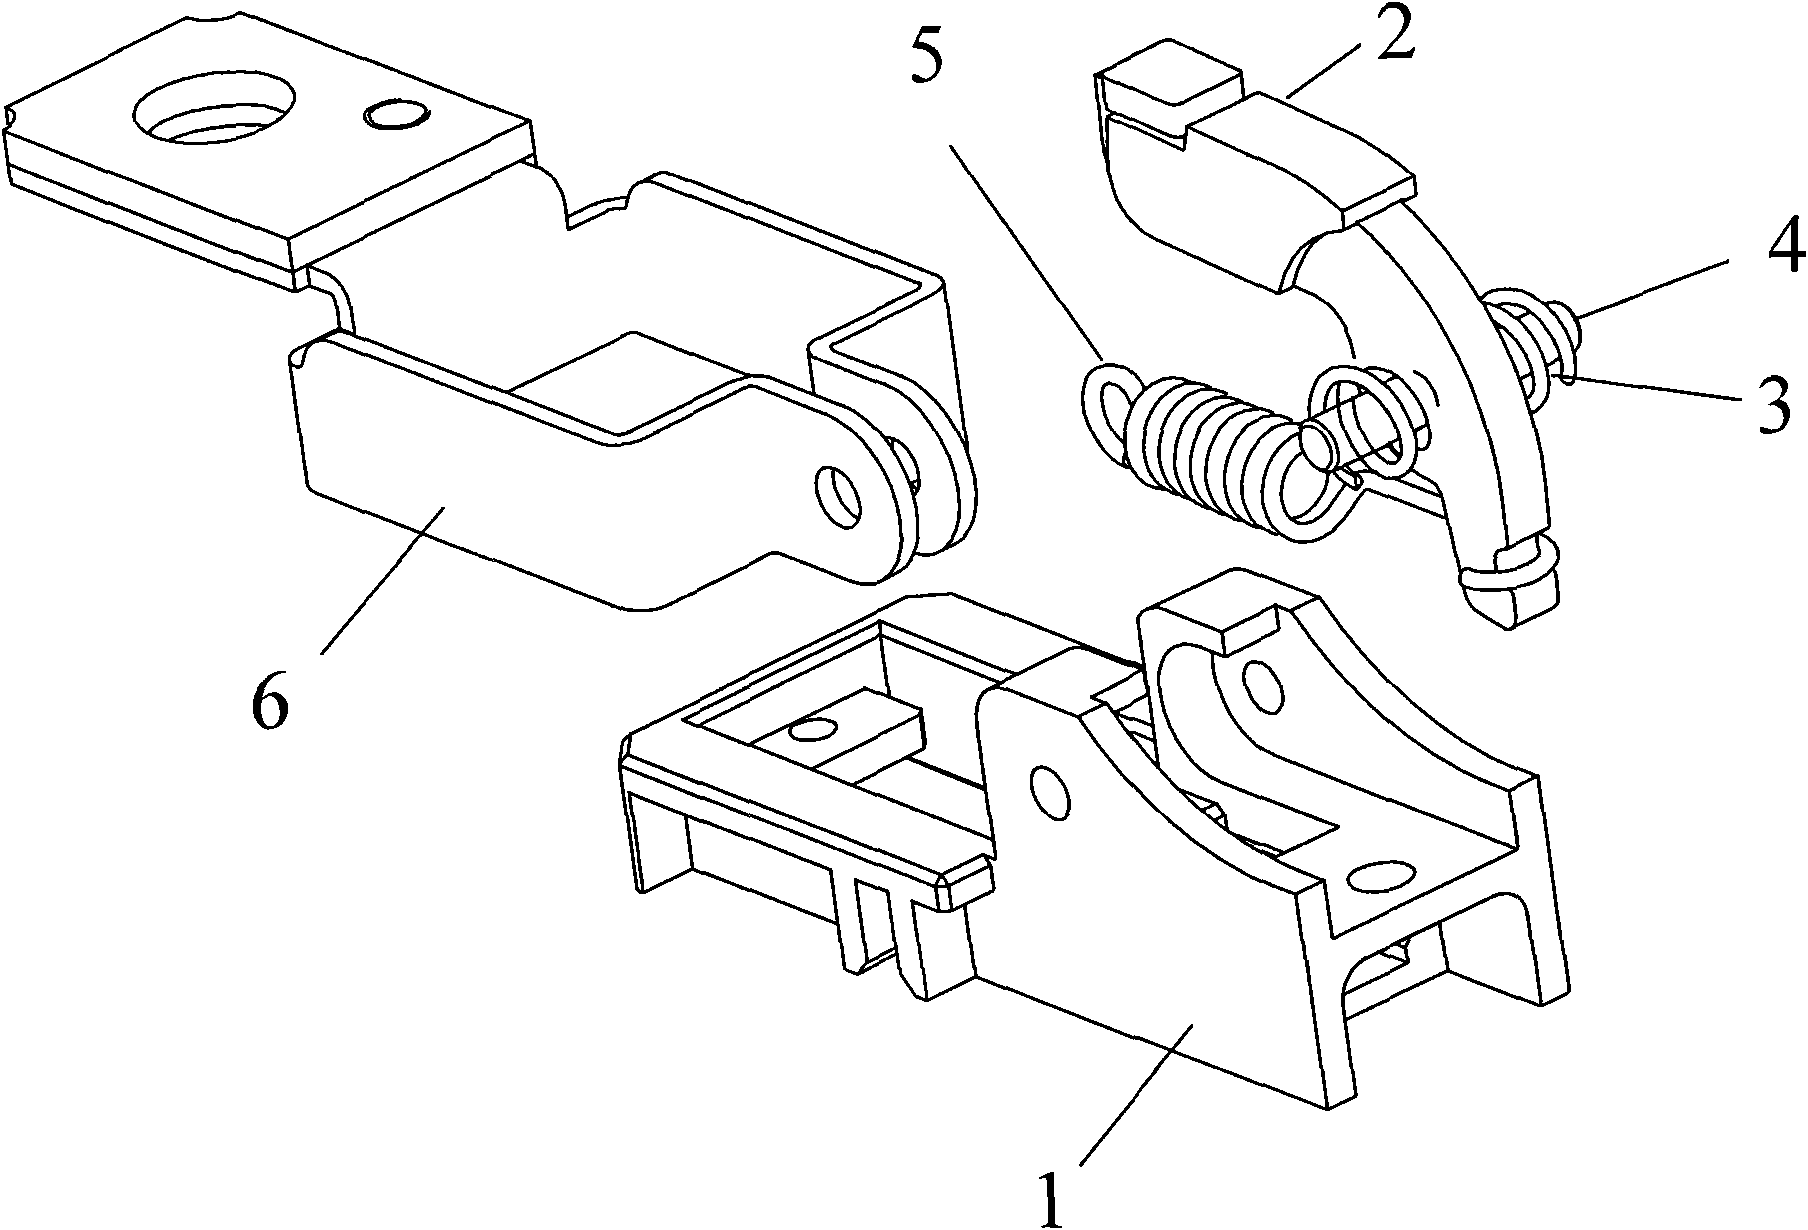 Repulsive clamping static contact structure of low-voltage circuit breaker